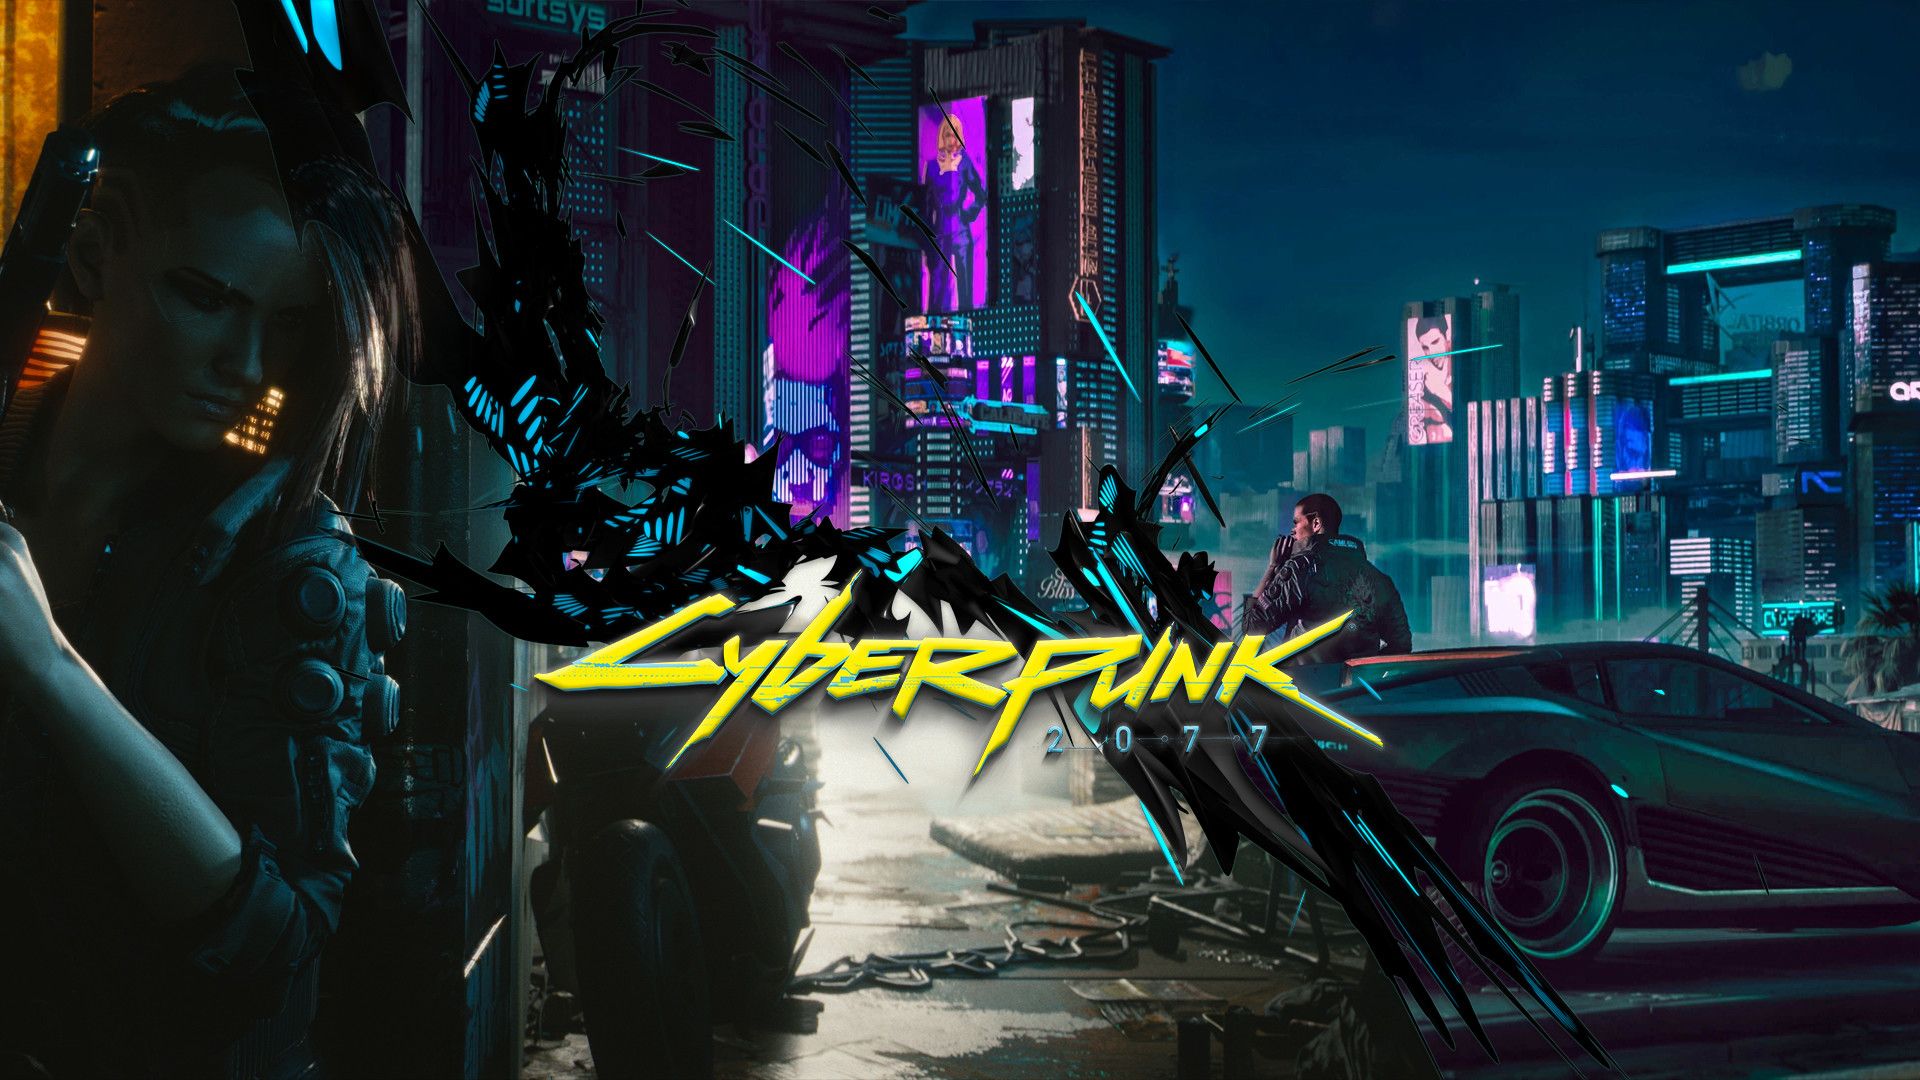 730+ Cyberpunk HD Wallpapers and Backgrounds